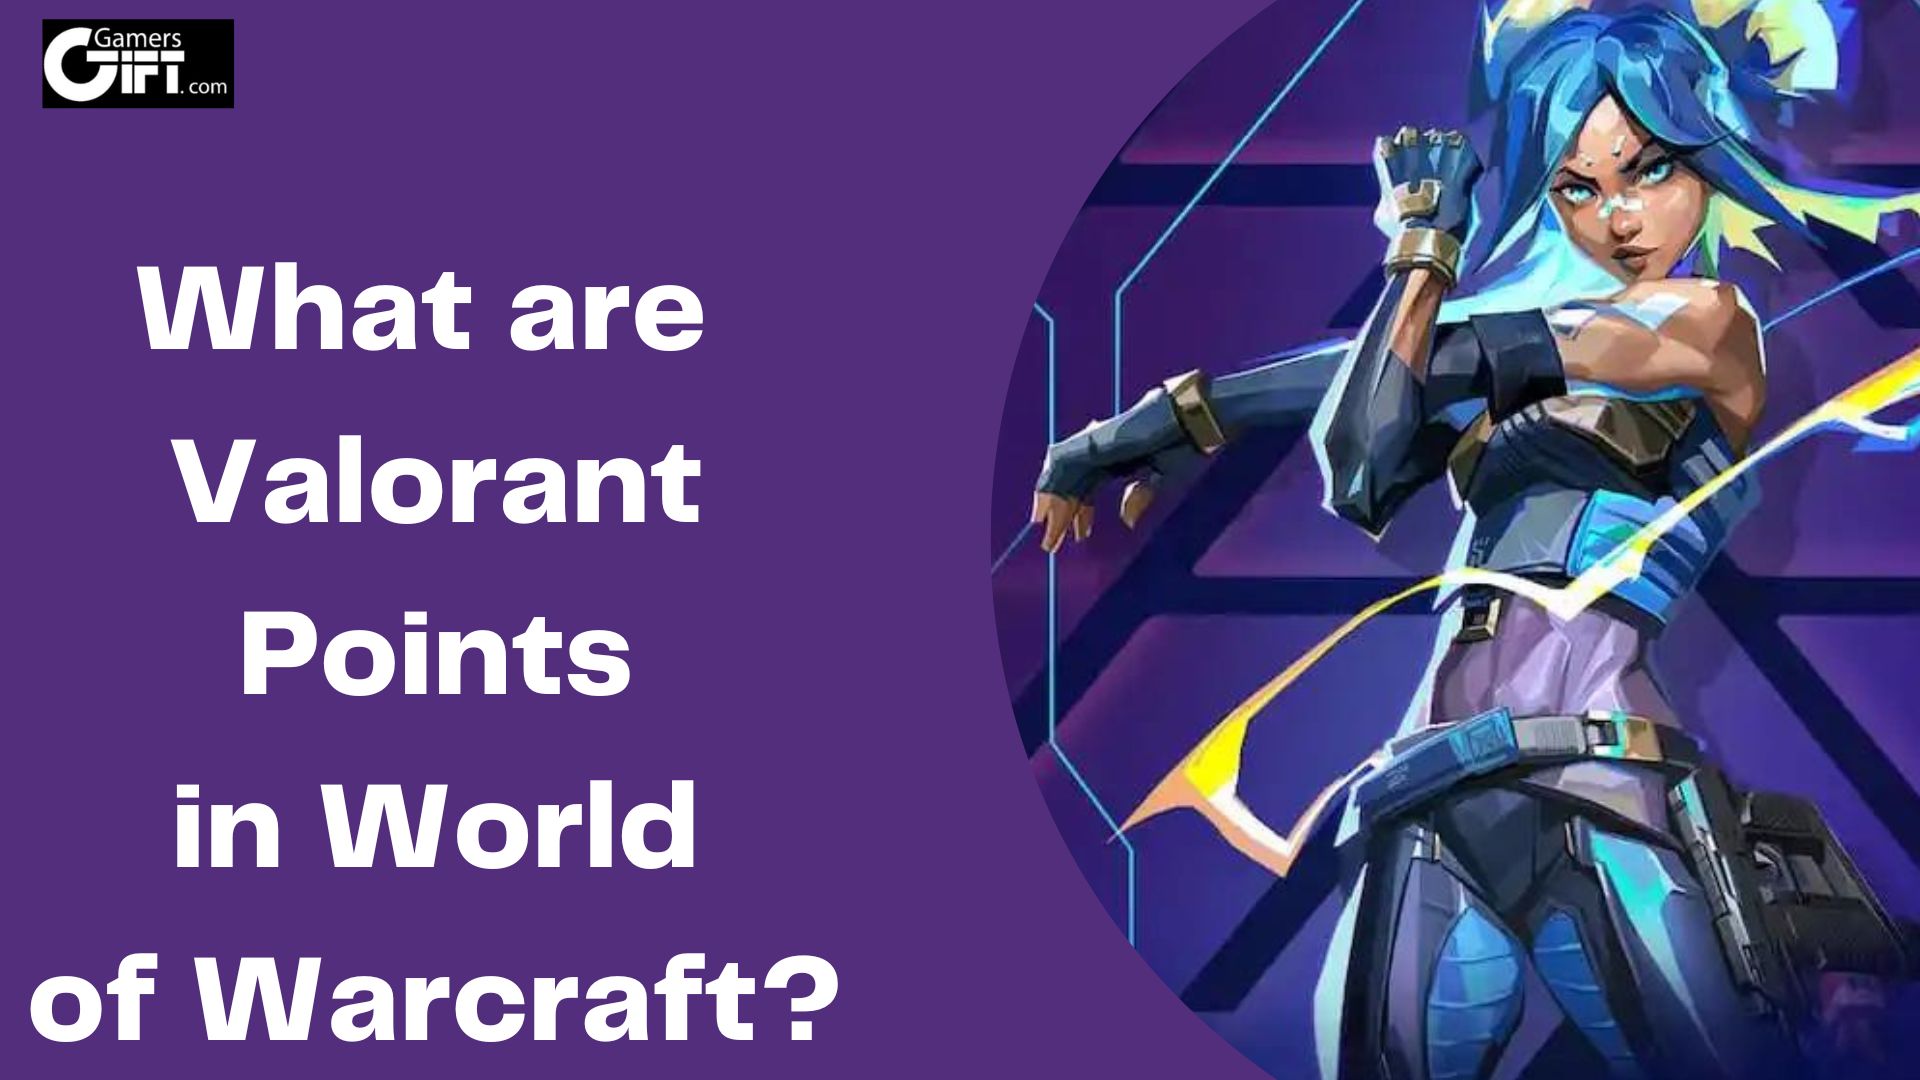 What are Valorant Points in World of Warcraft?